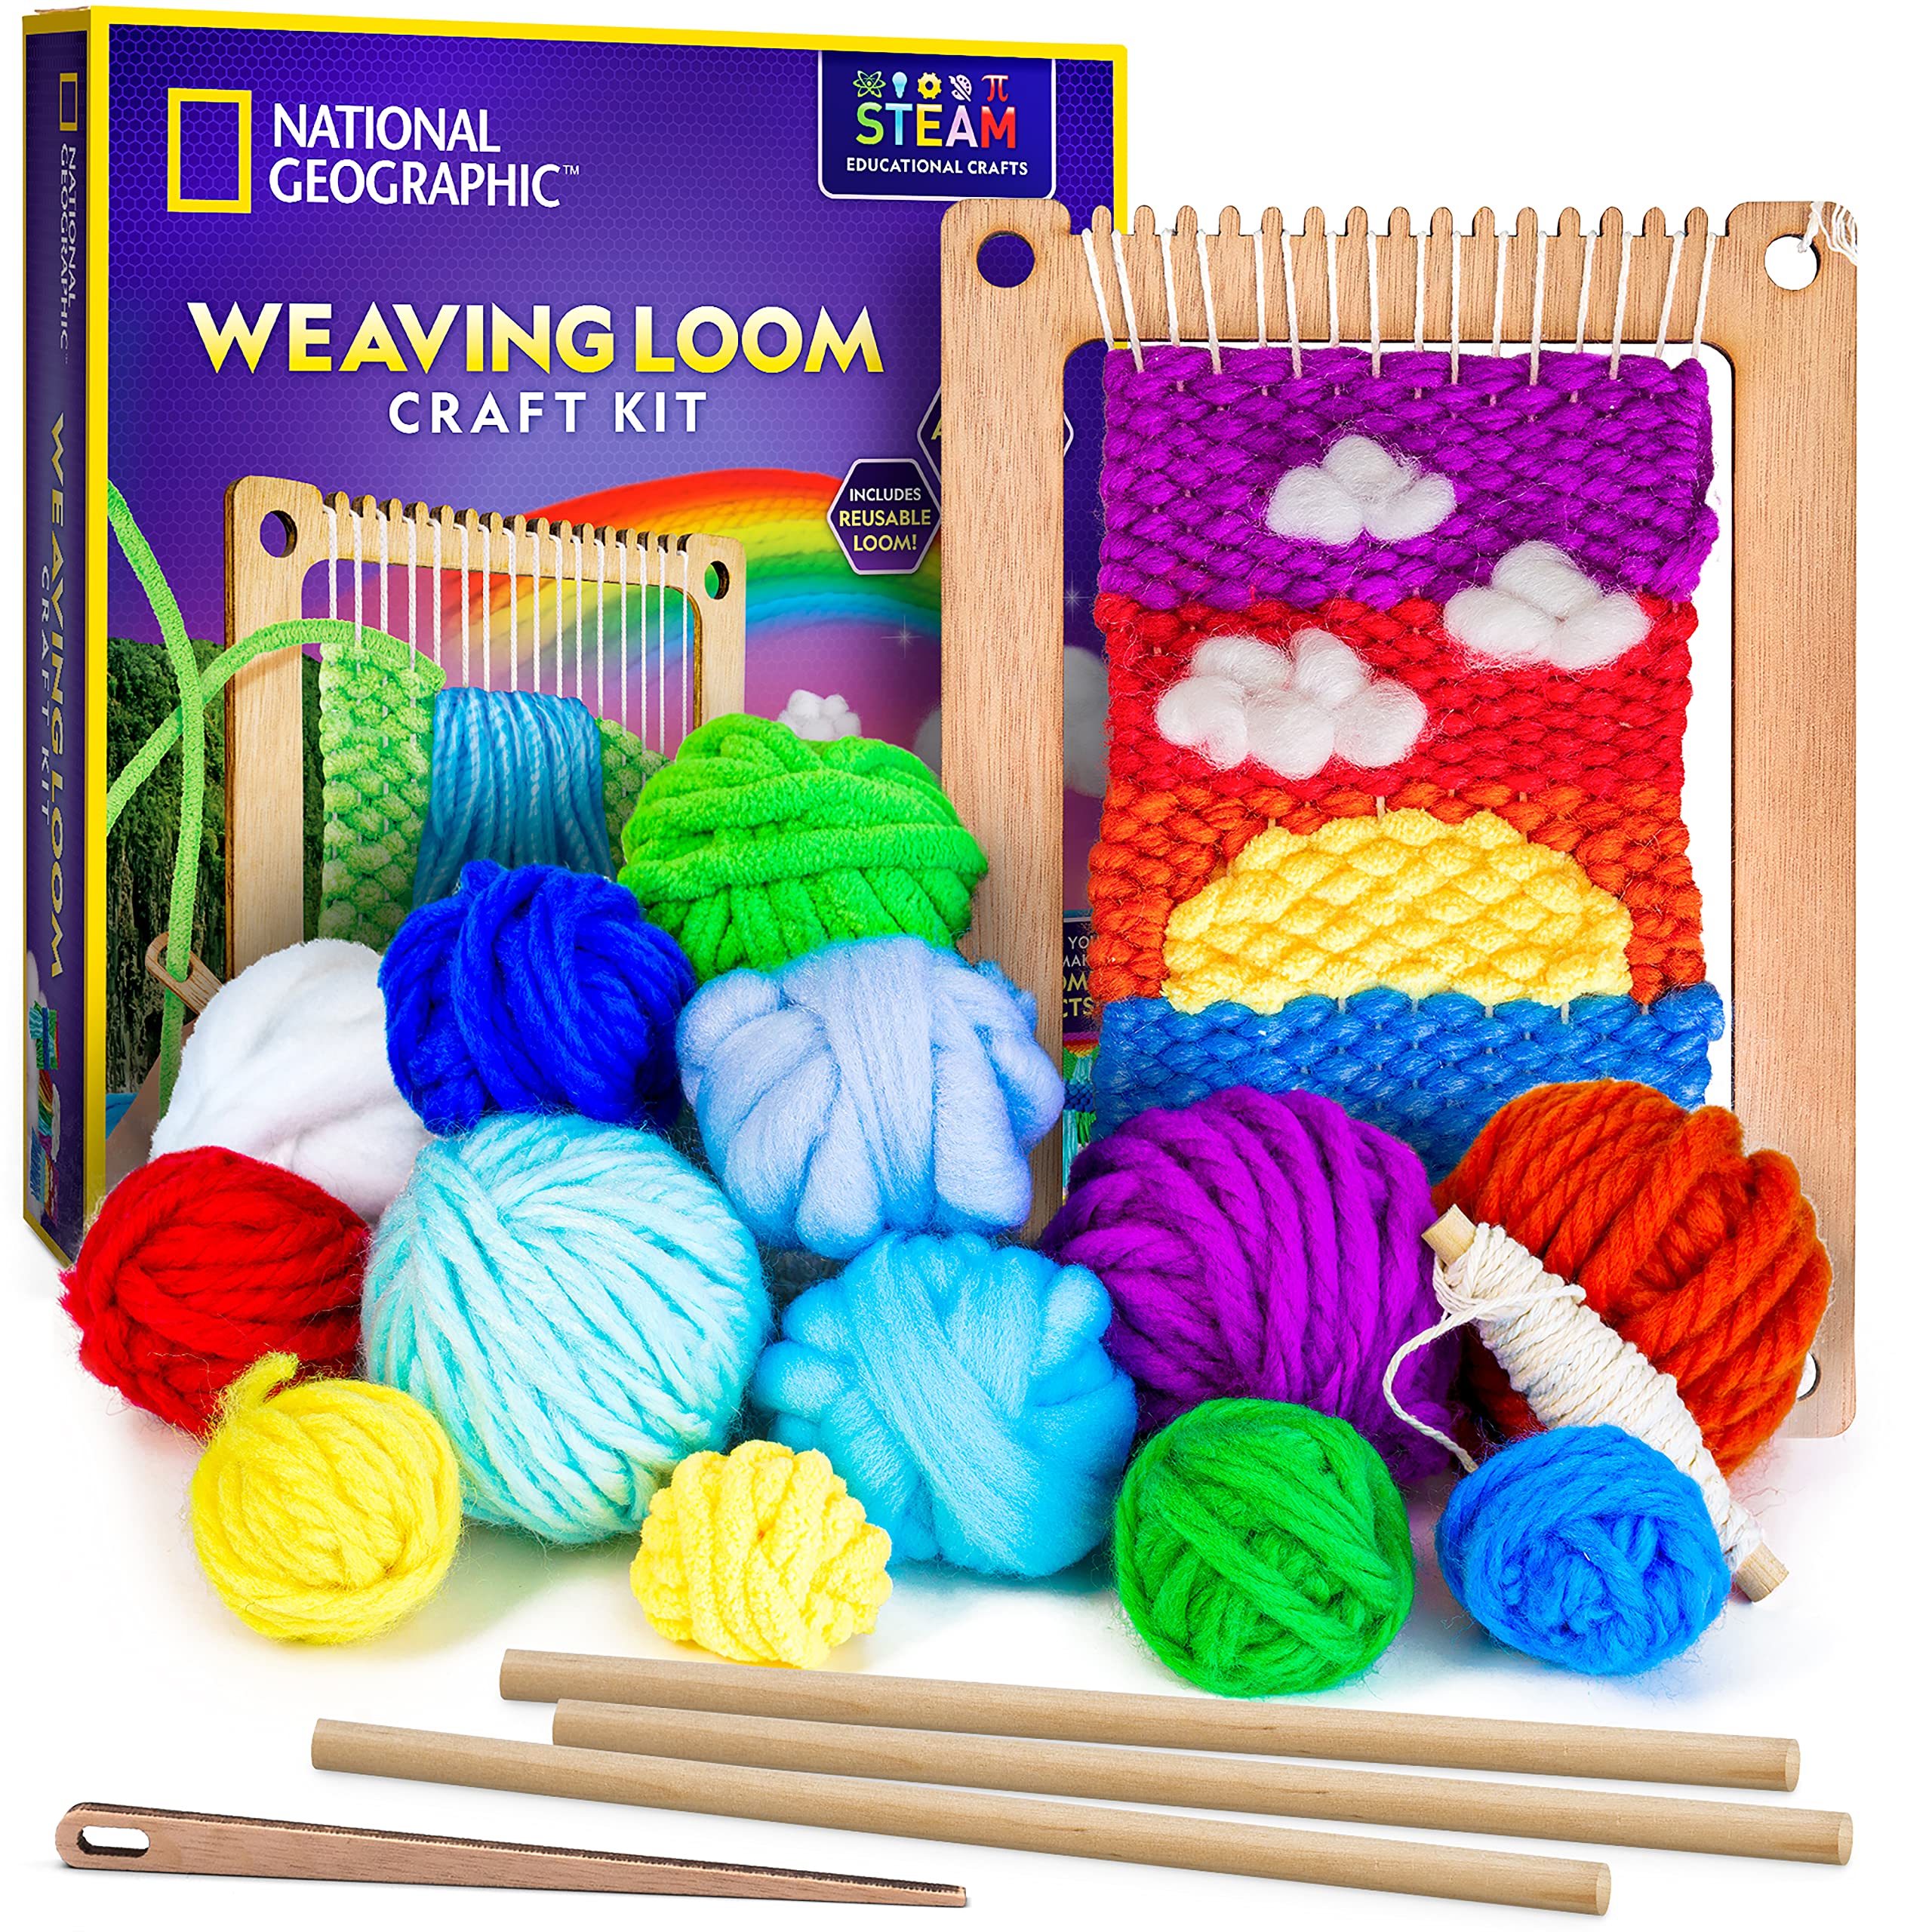 NATIONAL GEOGRAPHIC Rock Painting Kit